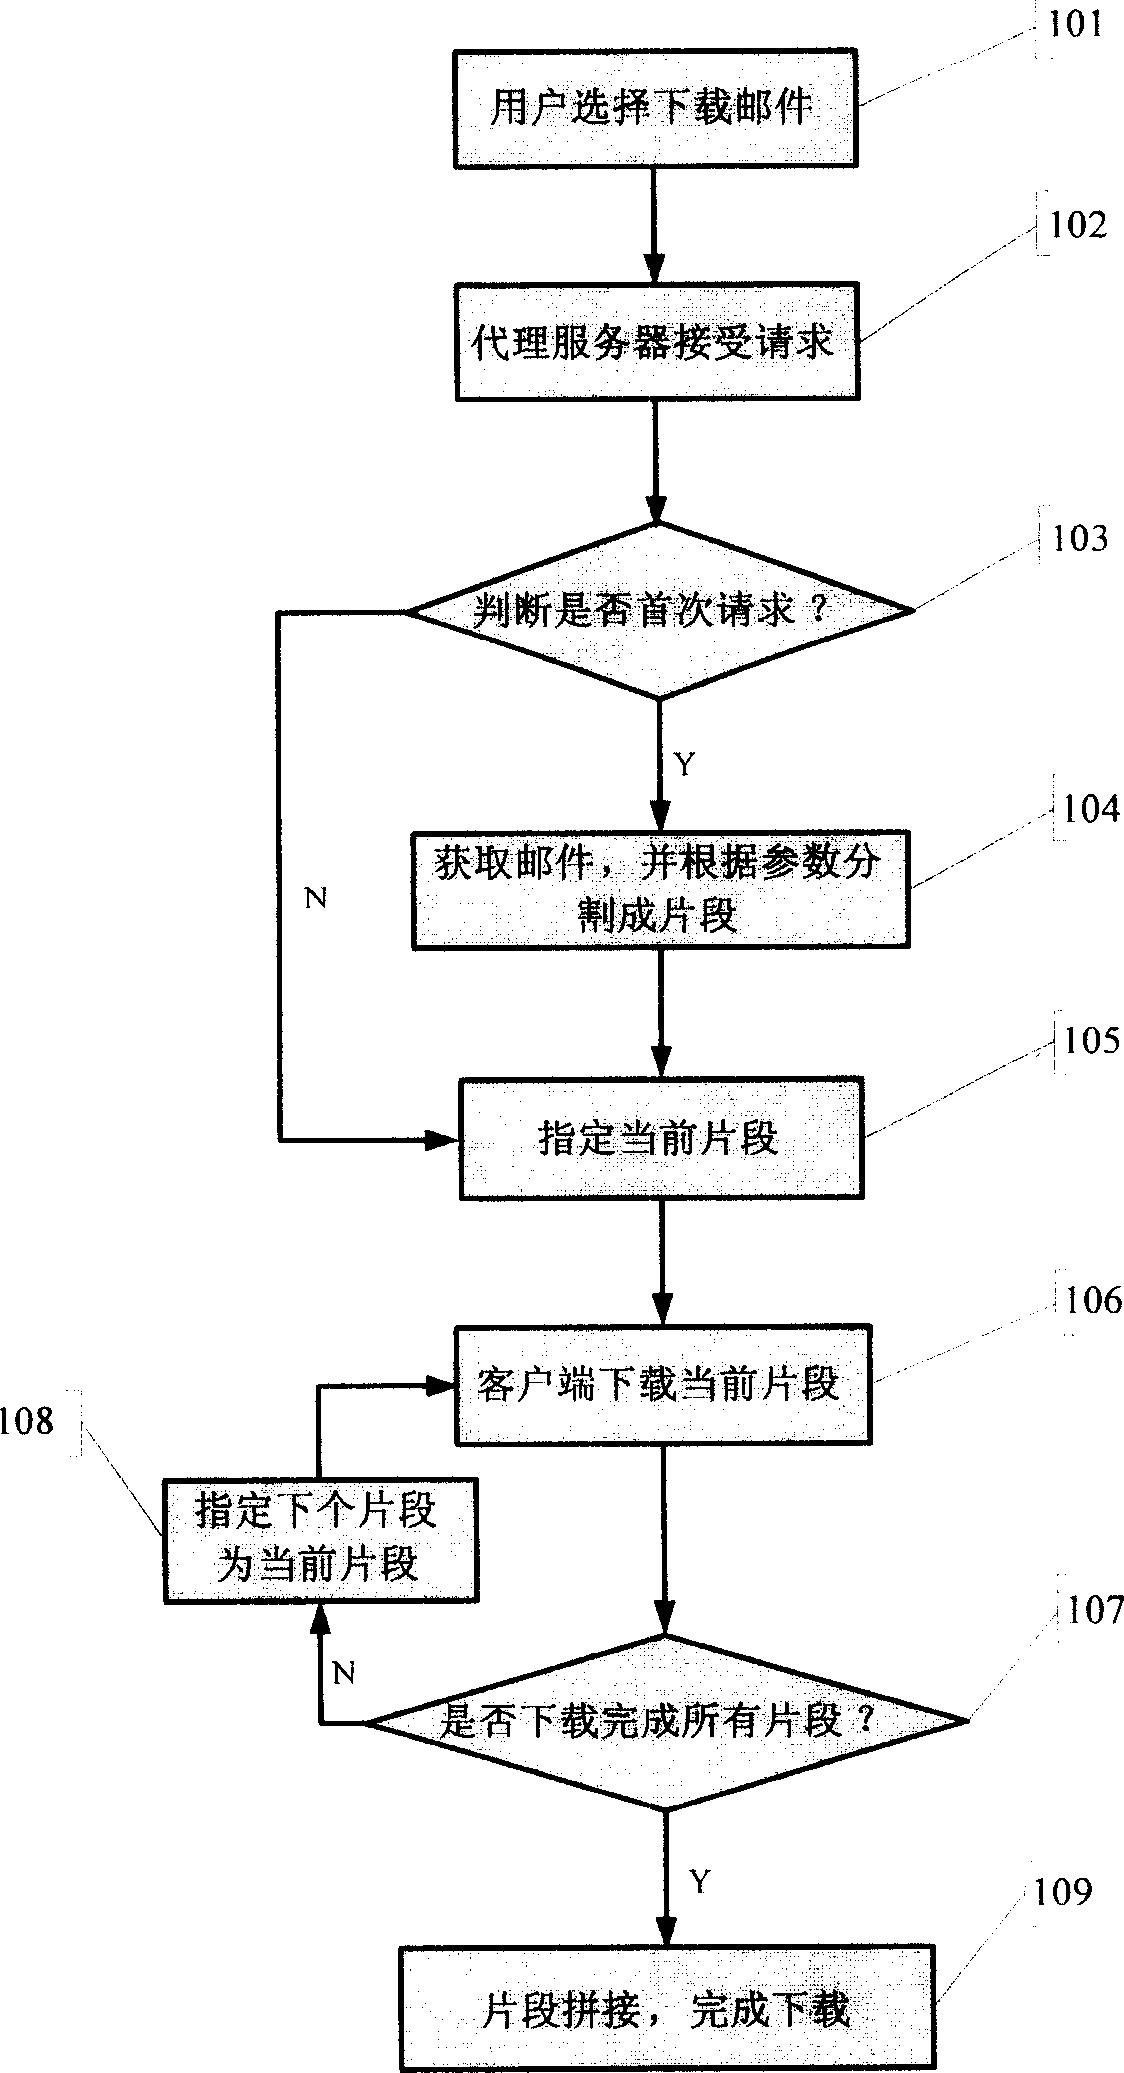 Breaker point continuous transmission method based on mail